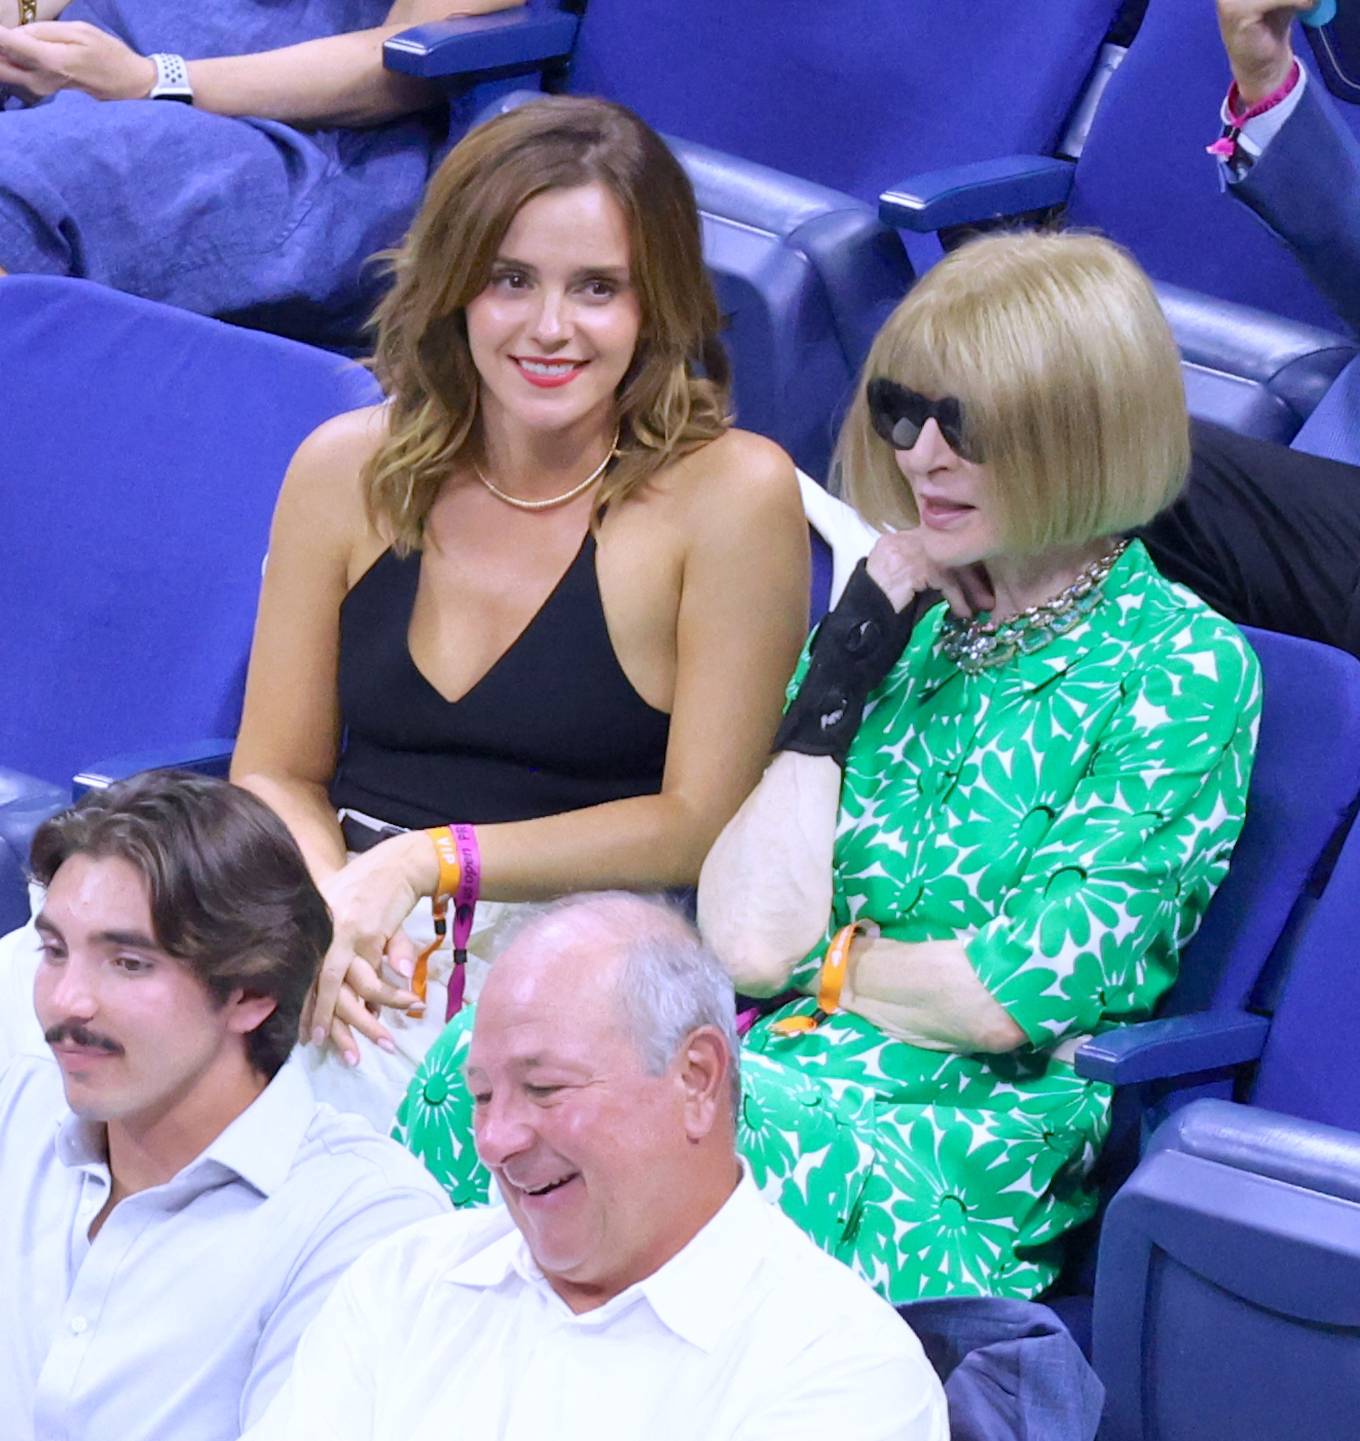 Emma Watson - And Ana Wintour attend the quarter final at The US Open in New York City